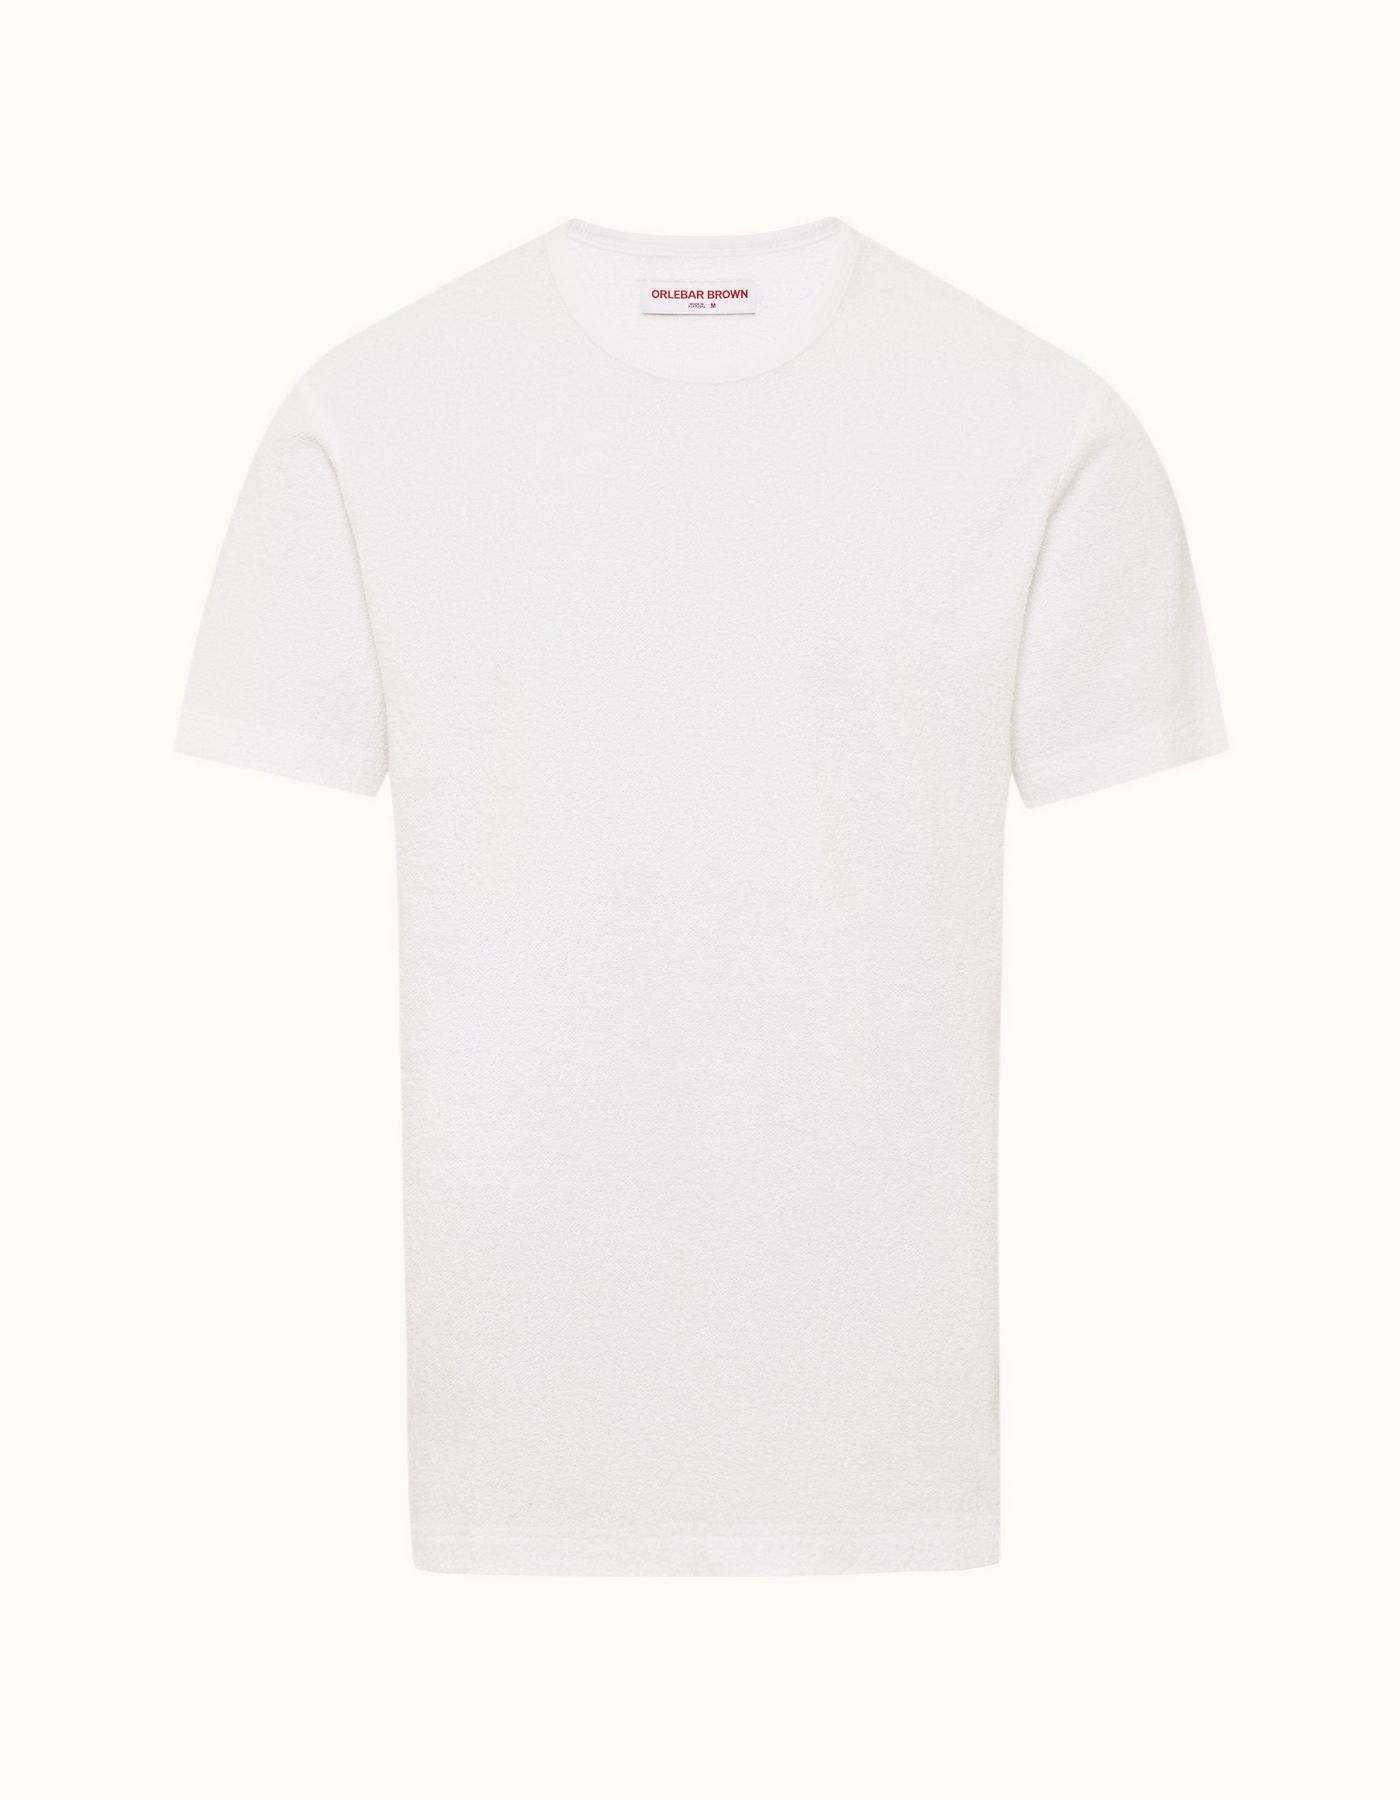 Nicolas Towelling - Mens White Relaxed Fit Towelling T-shirt